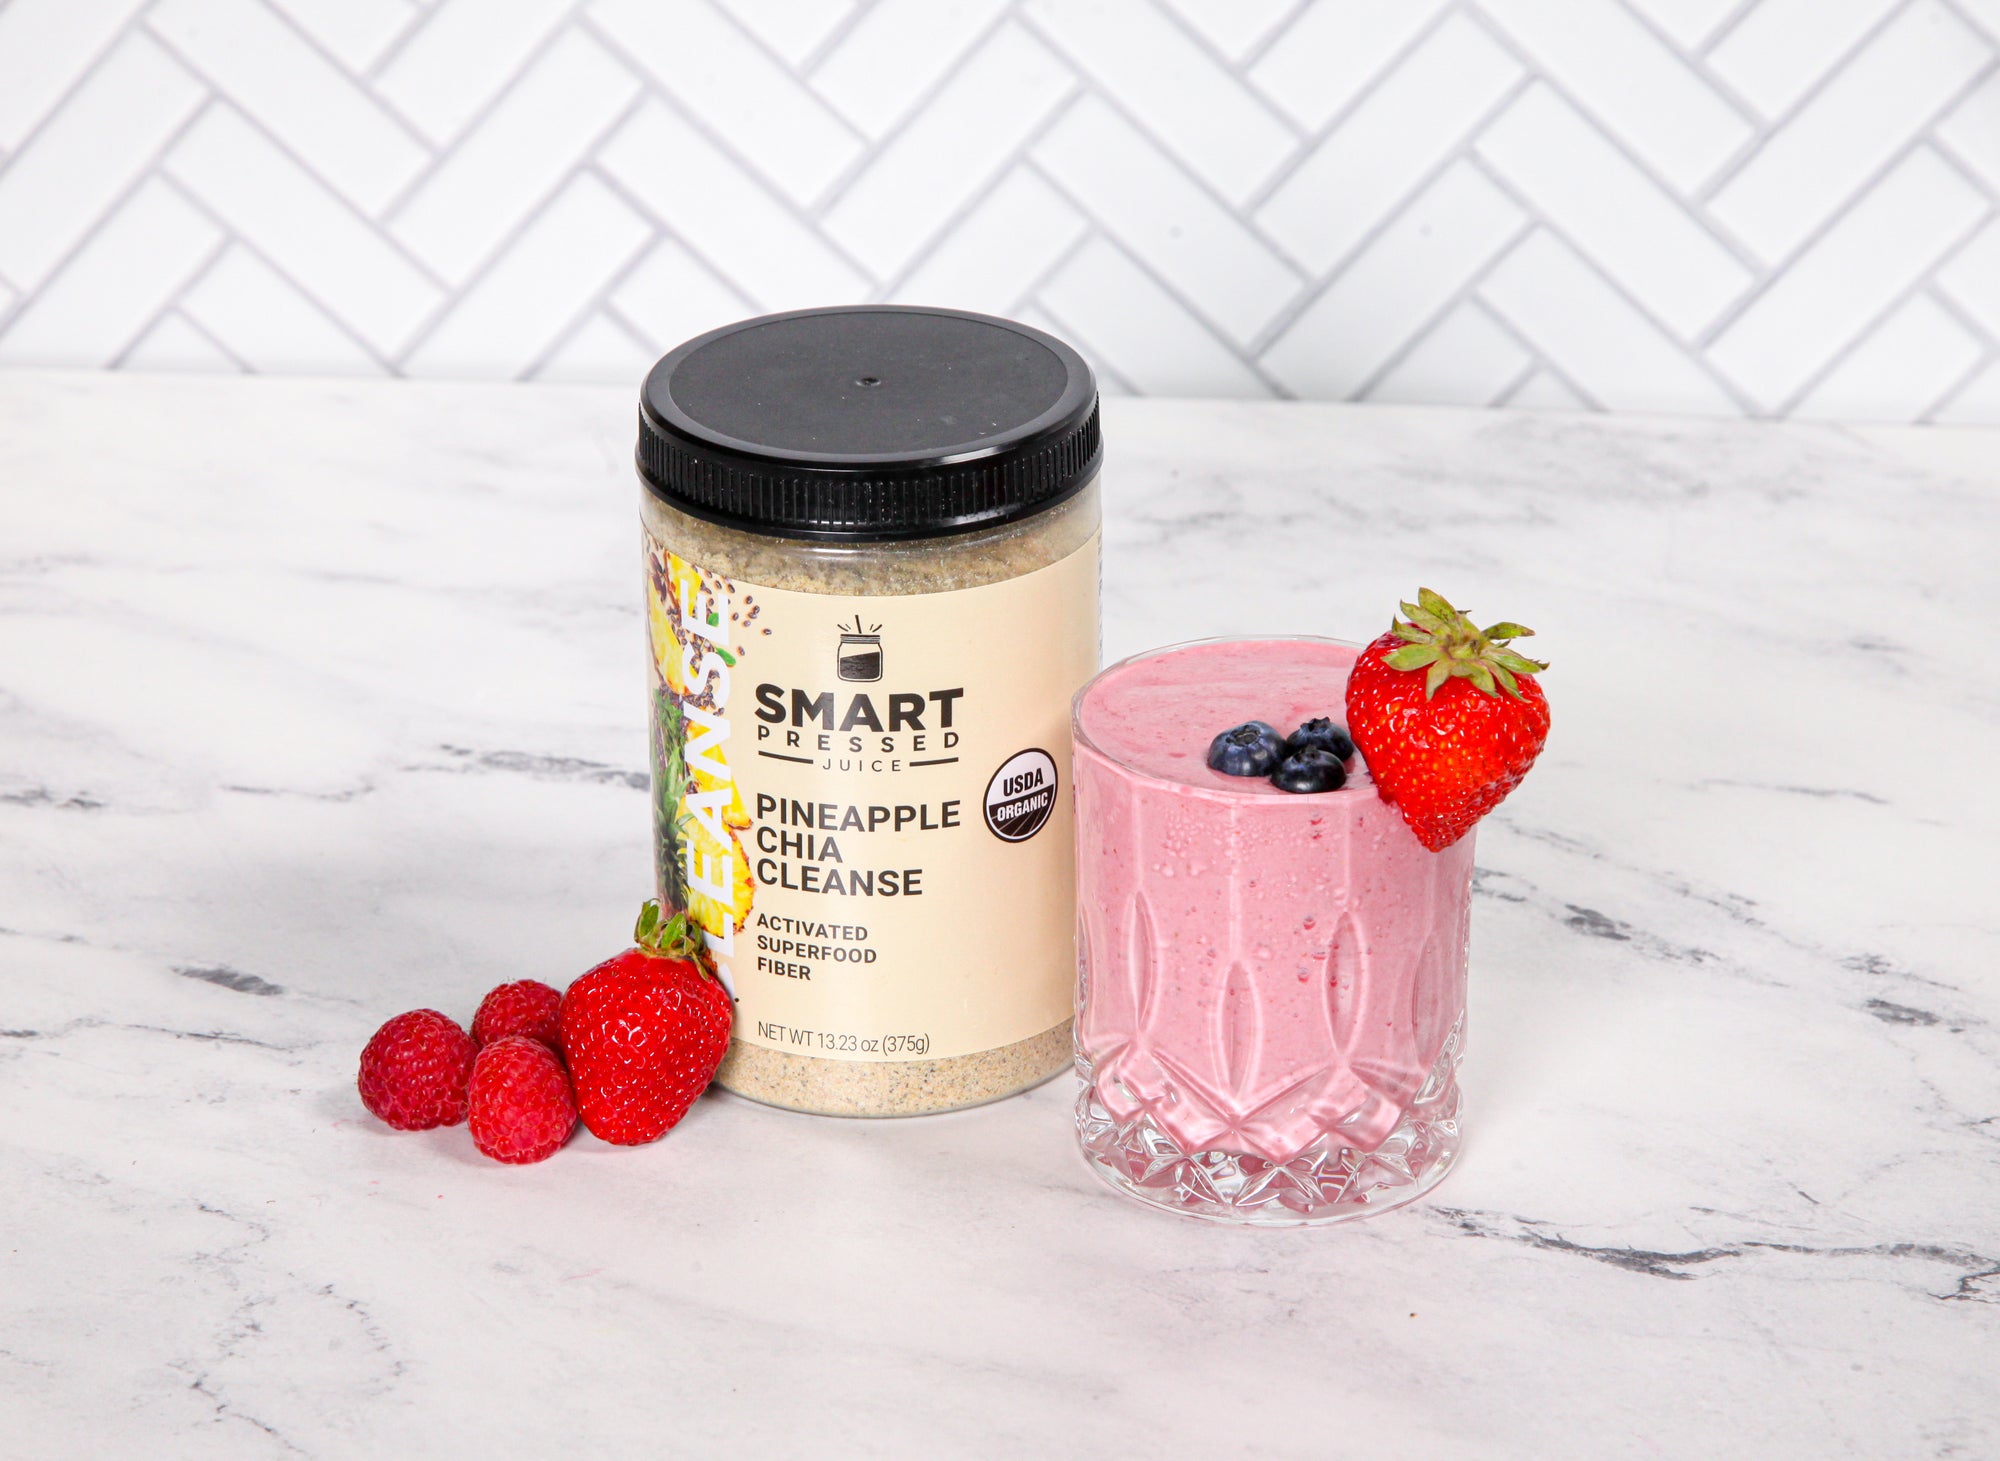 front view of a glass of pineapple chia cleanse signature smoothie topped with berries with a jar labeled as smart pressed pineapple chia cleanse with fresh berries on the side of the jar on top of a marble table